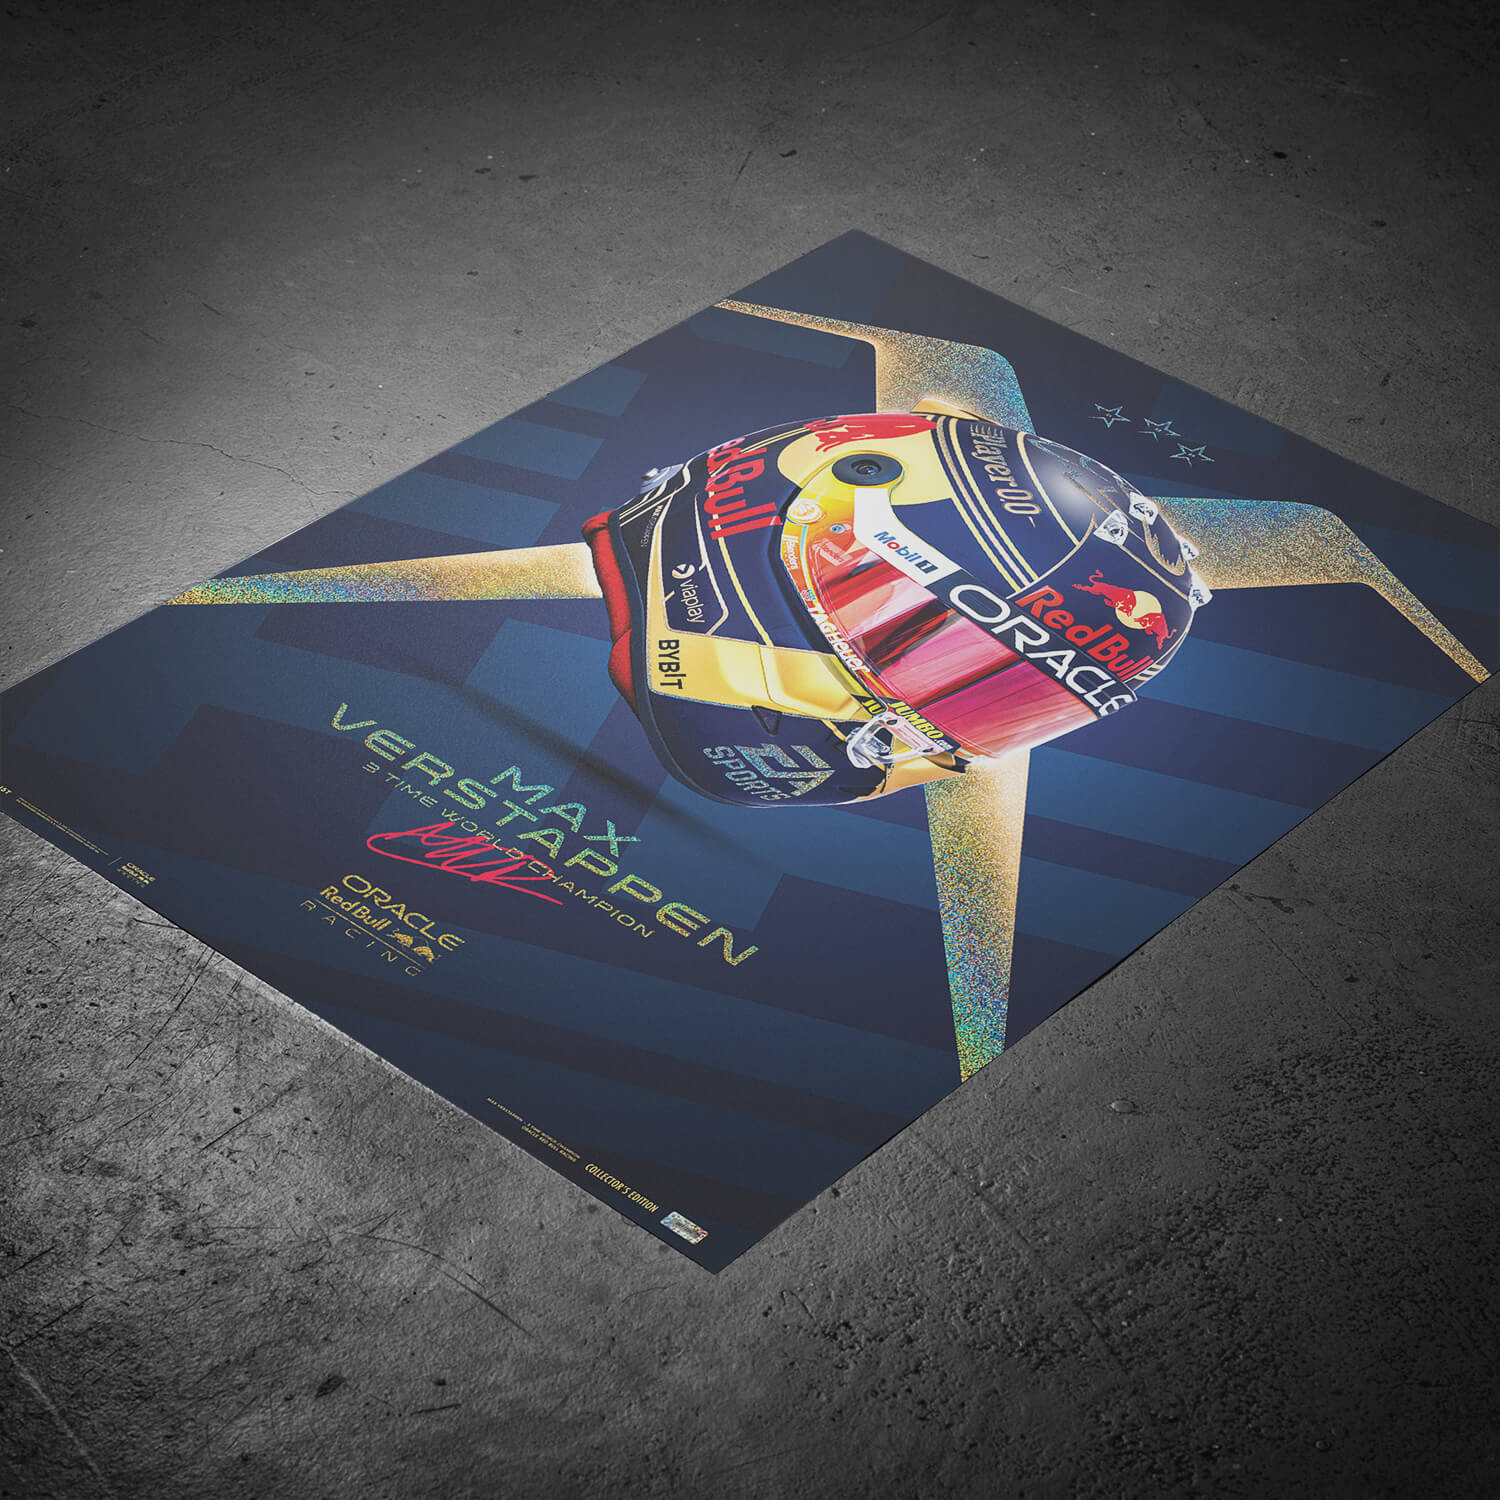 Oracle Red Bull Racing - Max Verstappen - Helmet - World Champion - 2023 | Collector’s Edition